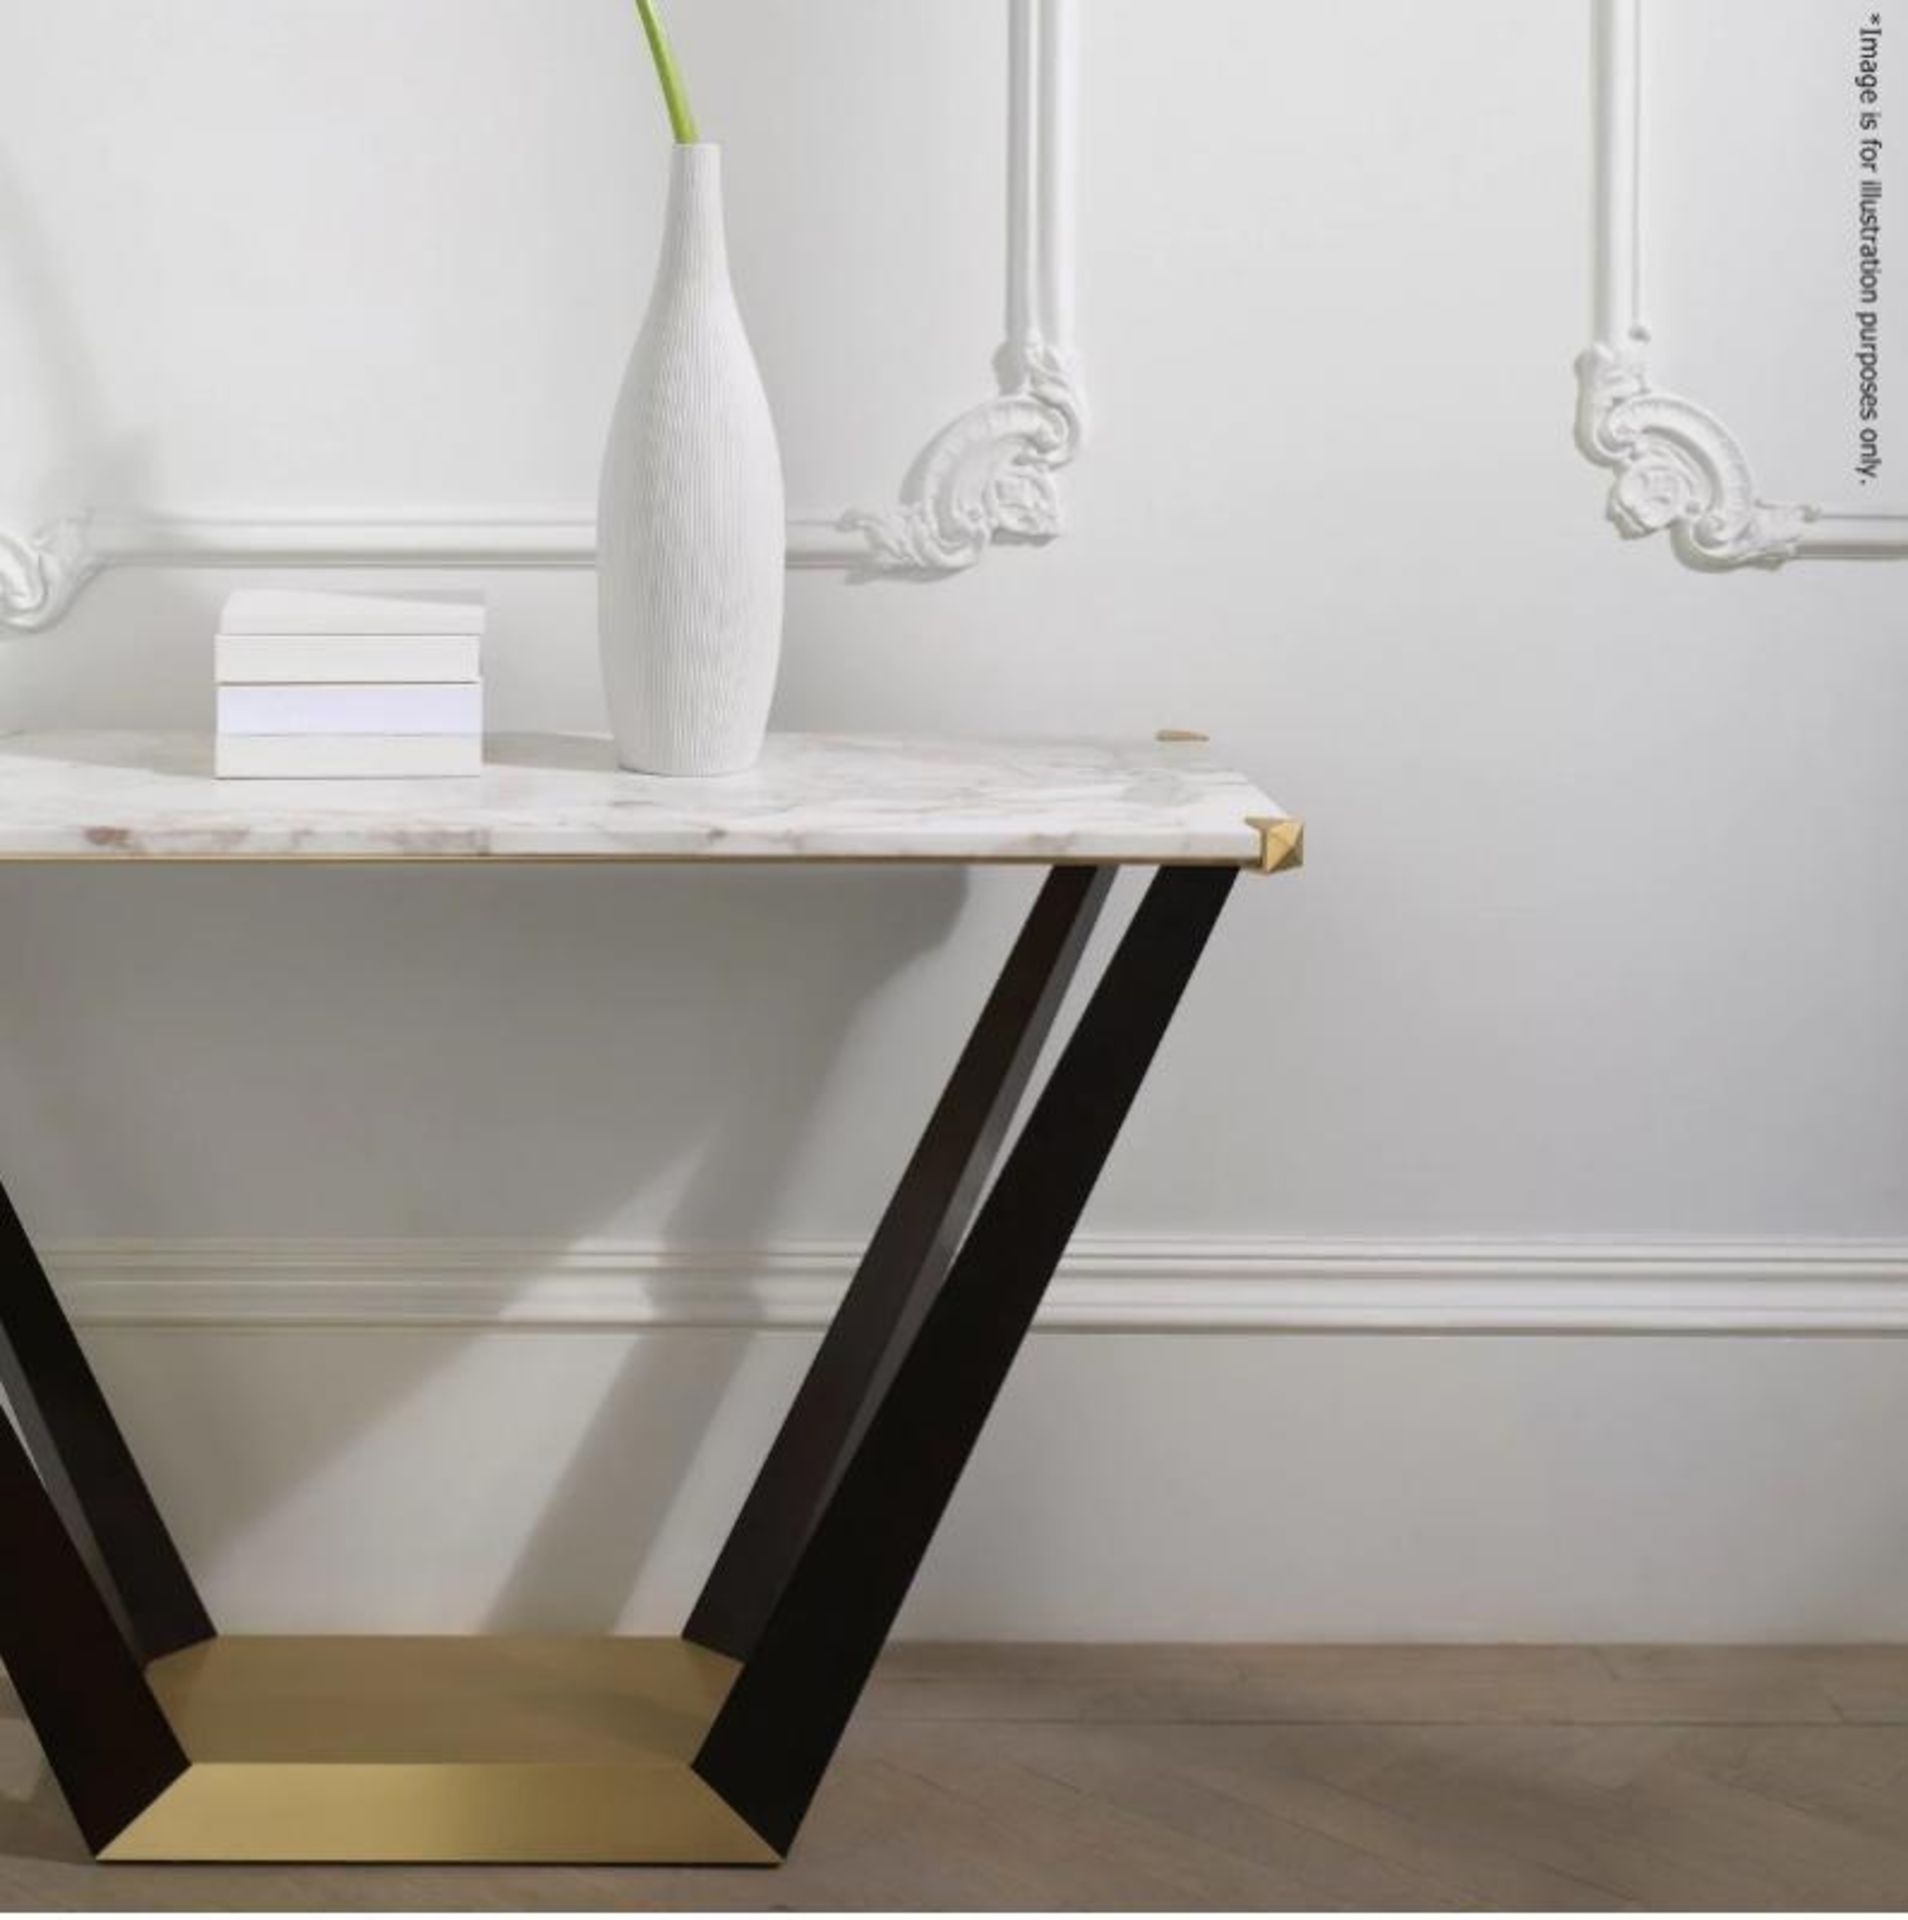 1 x PORADA Sayre Console Table (Base Only) - Ref: 5568974 NP2/18 - CL011 - Location: Altrincham WA14